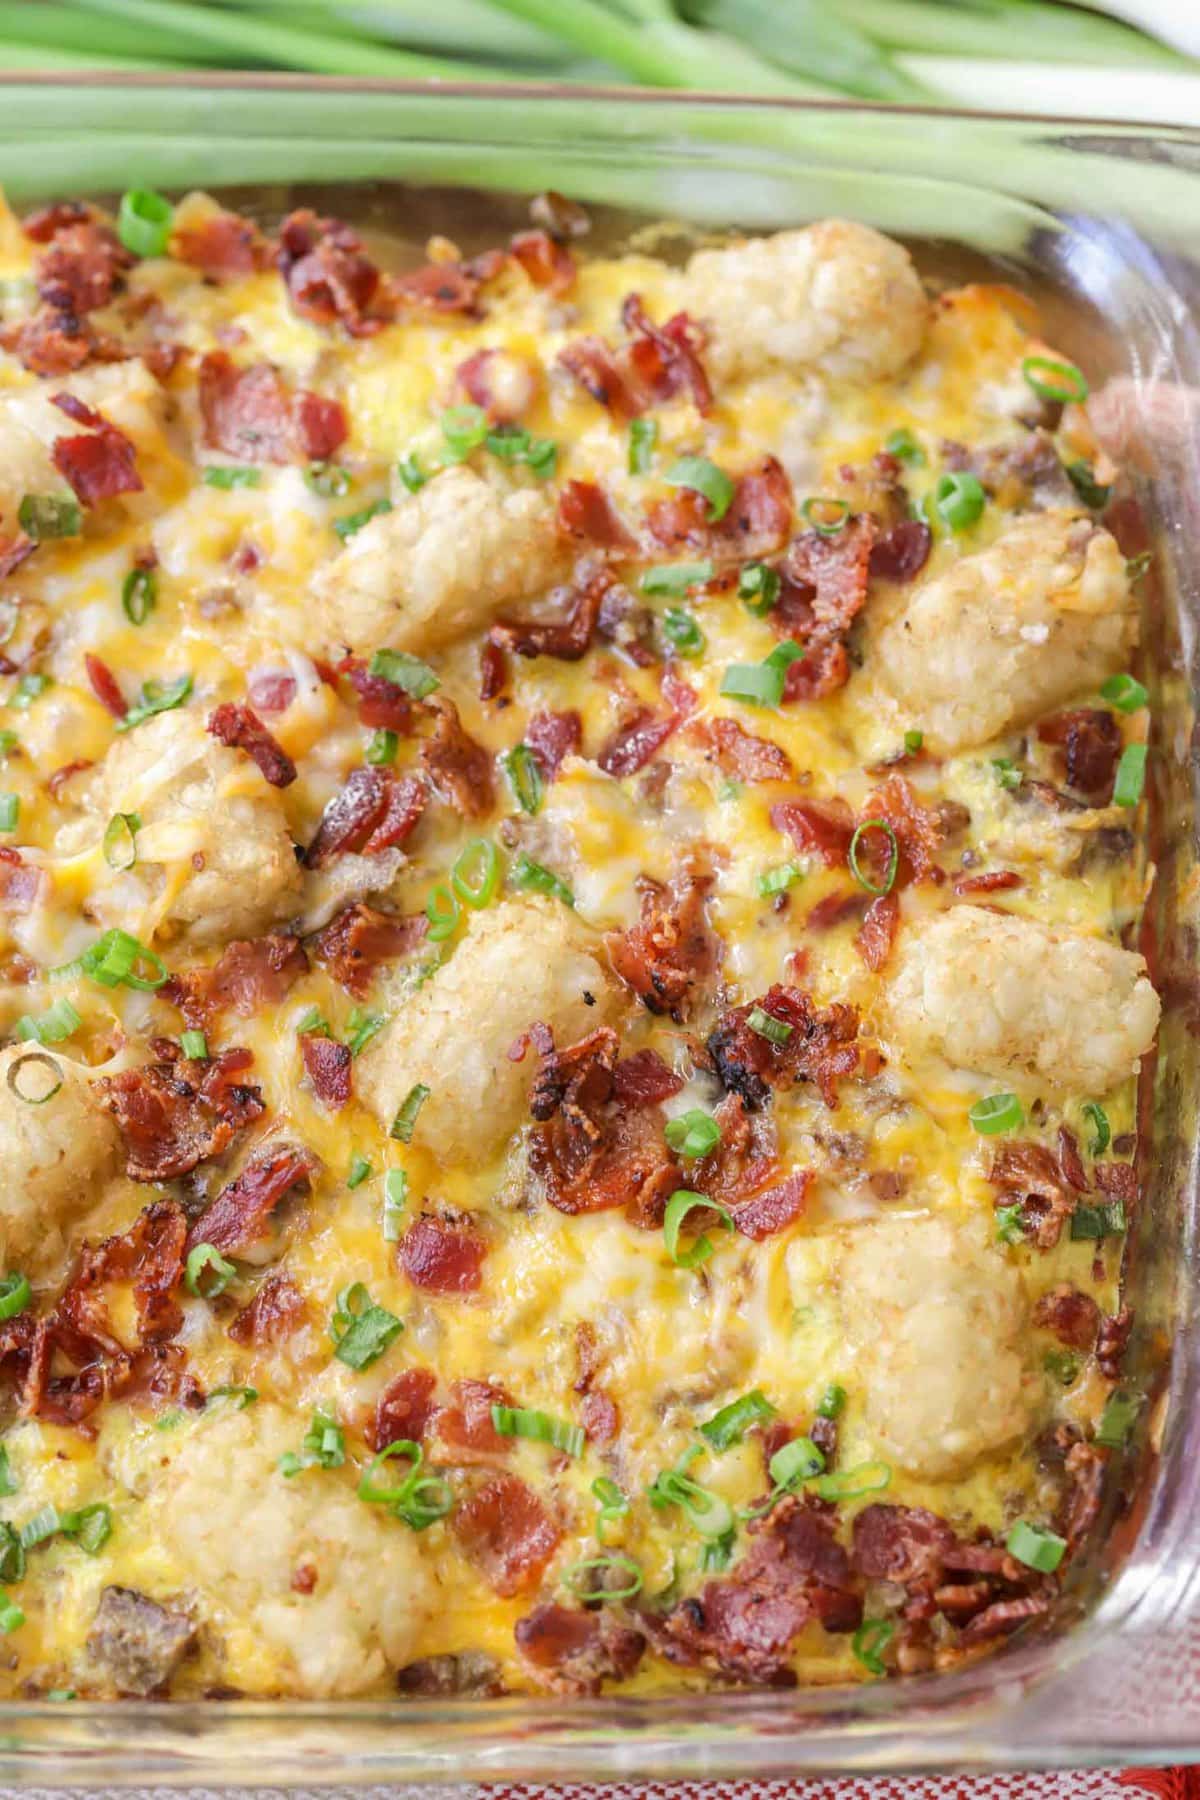 Tater Tot Sausage Breakfast Casserole baked in a baking dish.